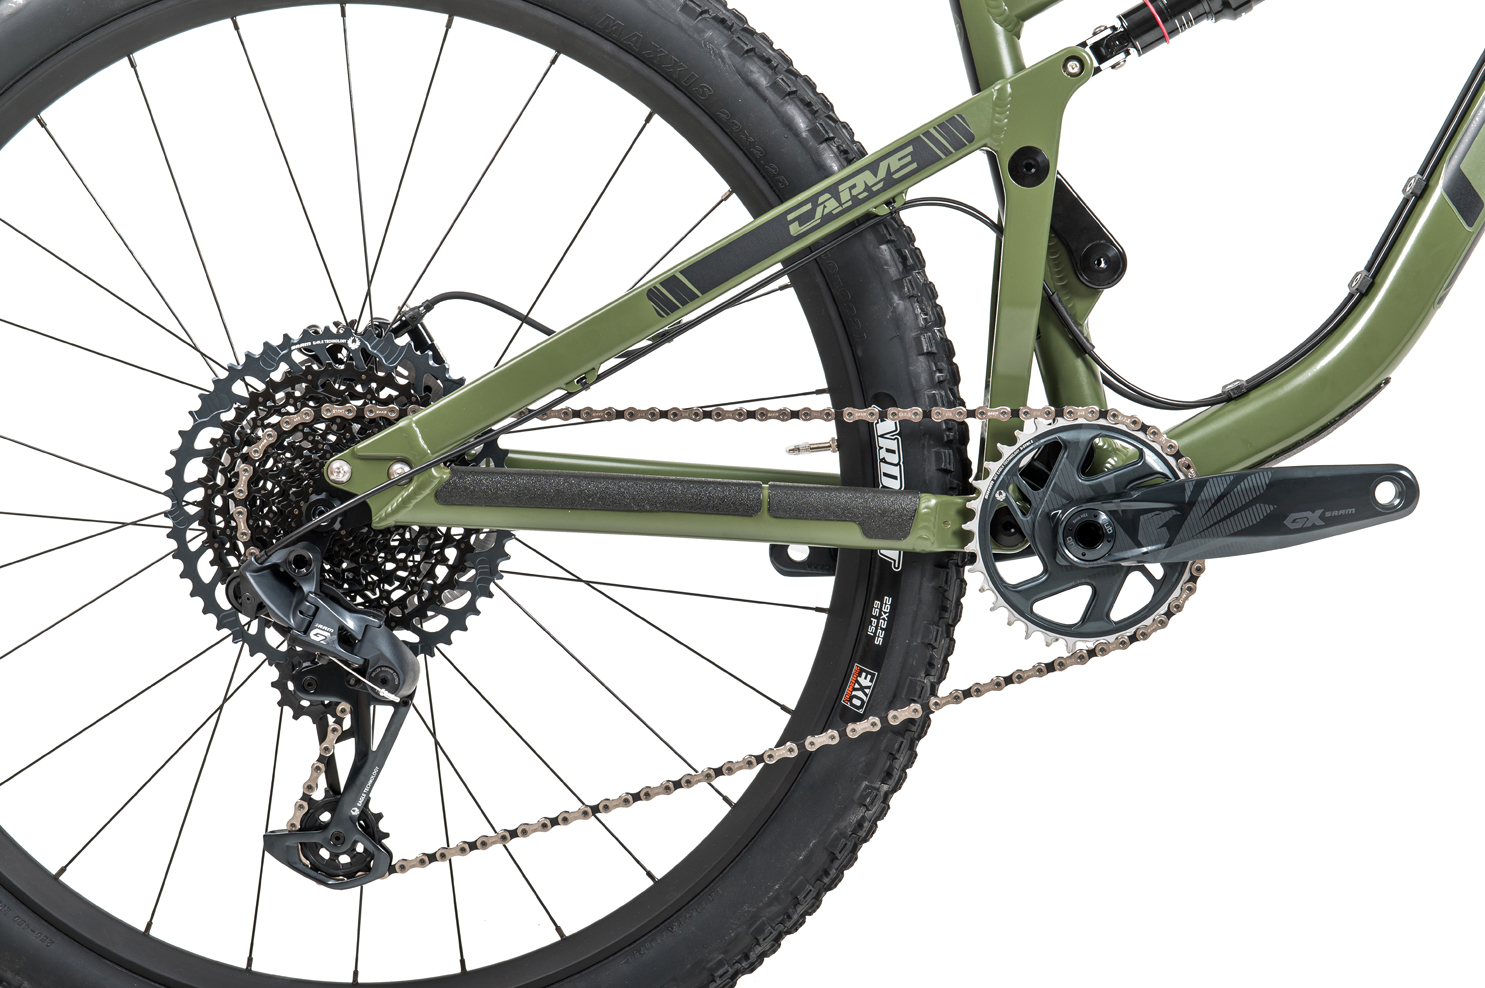 Mde 2021 Born In The Alps Carve 29 Race Bike Army Green Groupset Sram Gx Lunar Detail